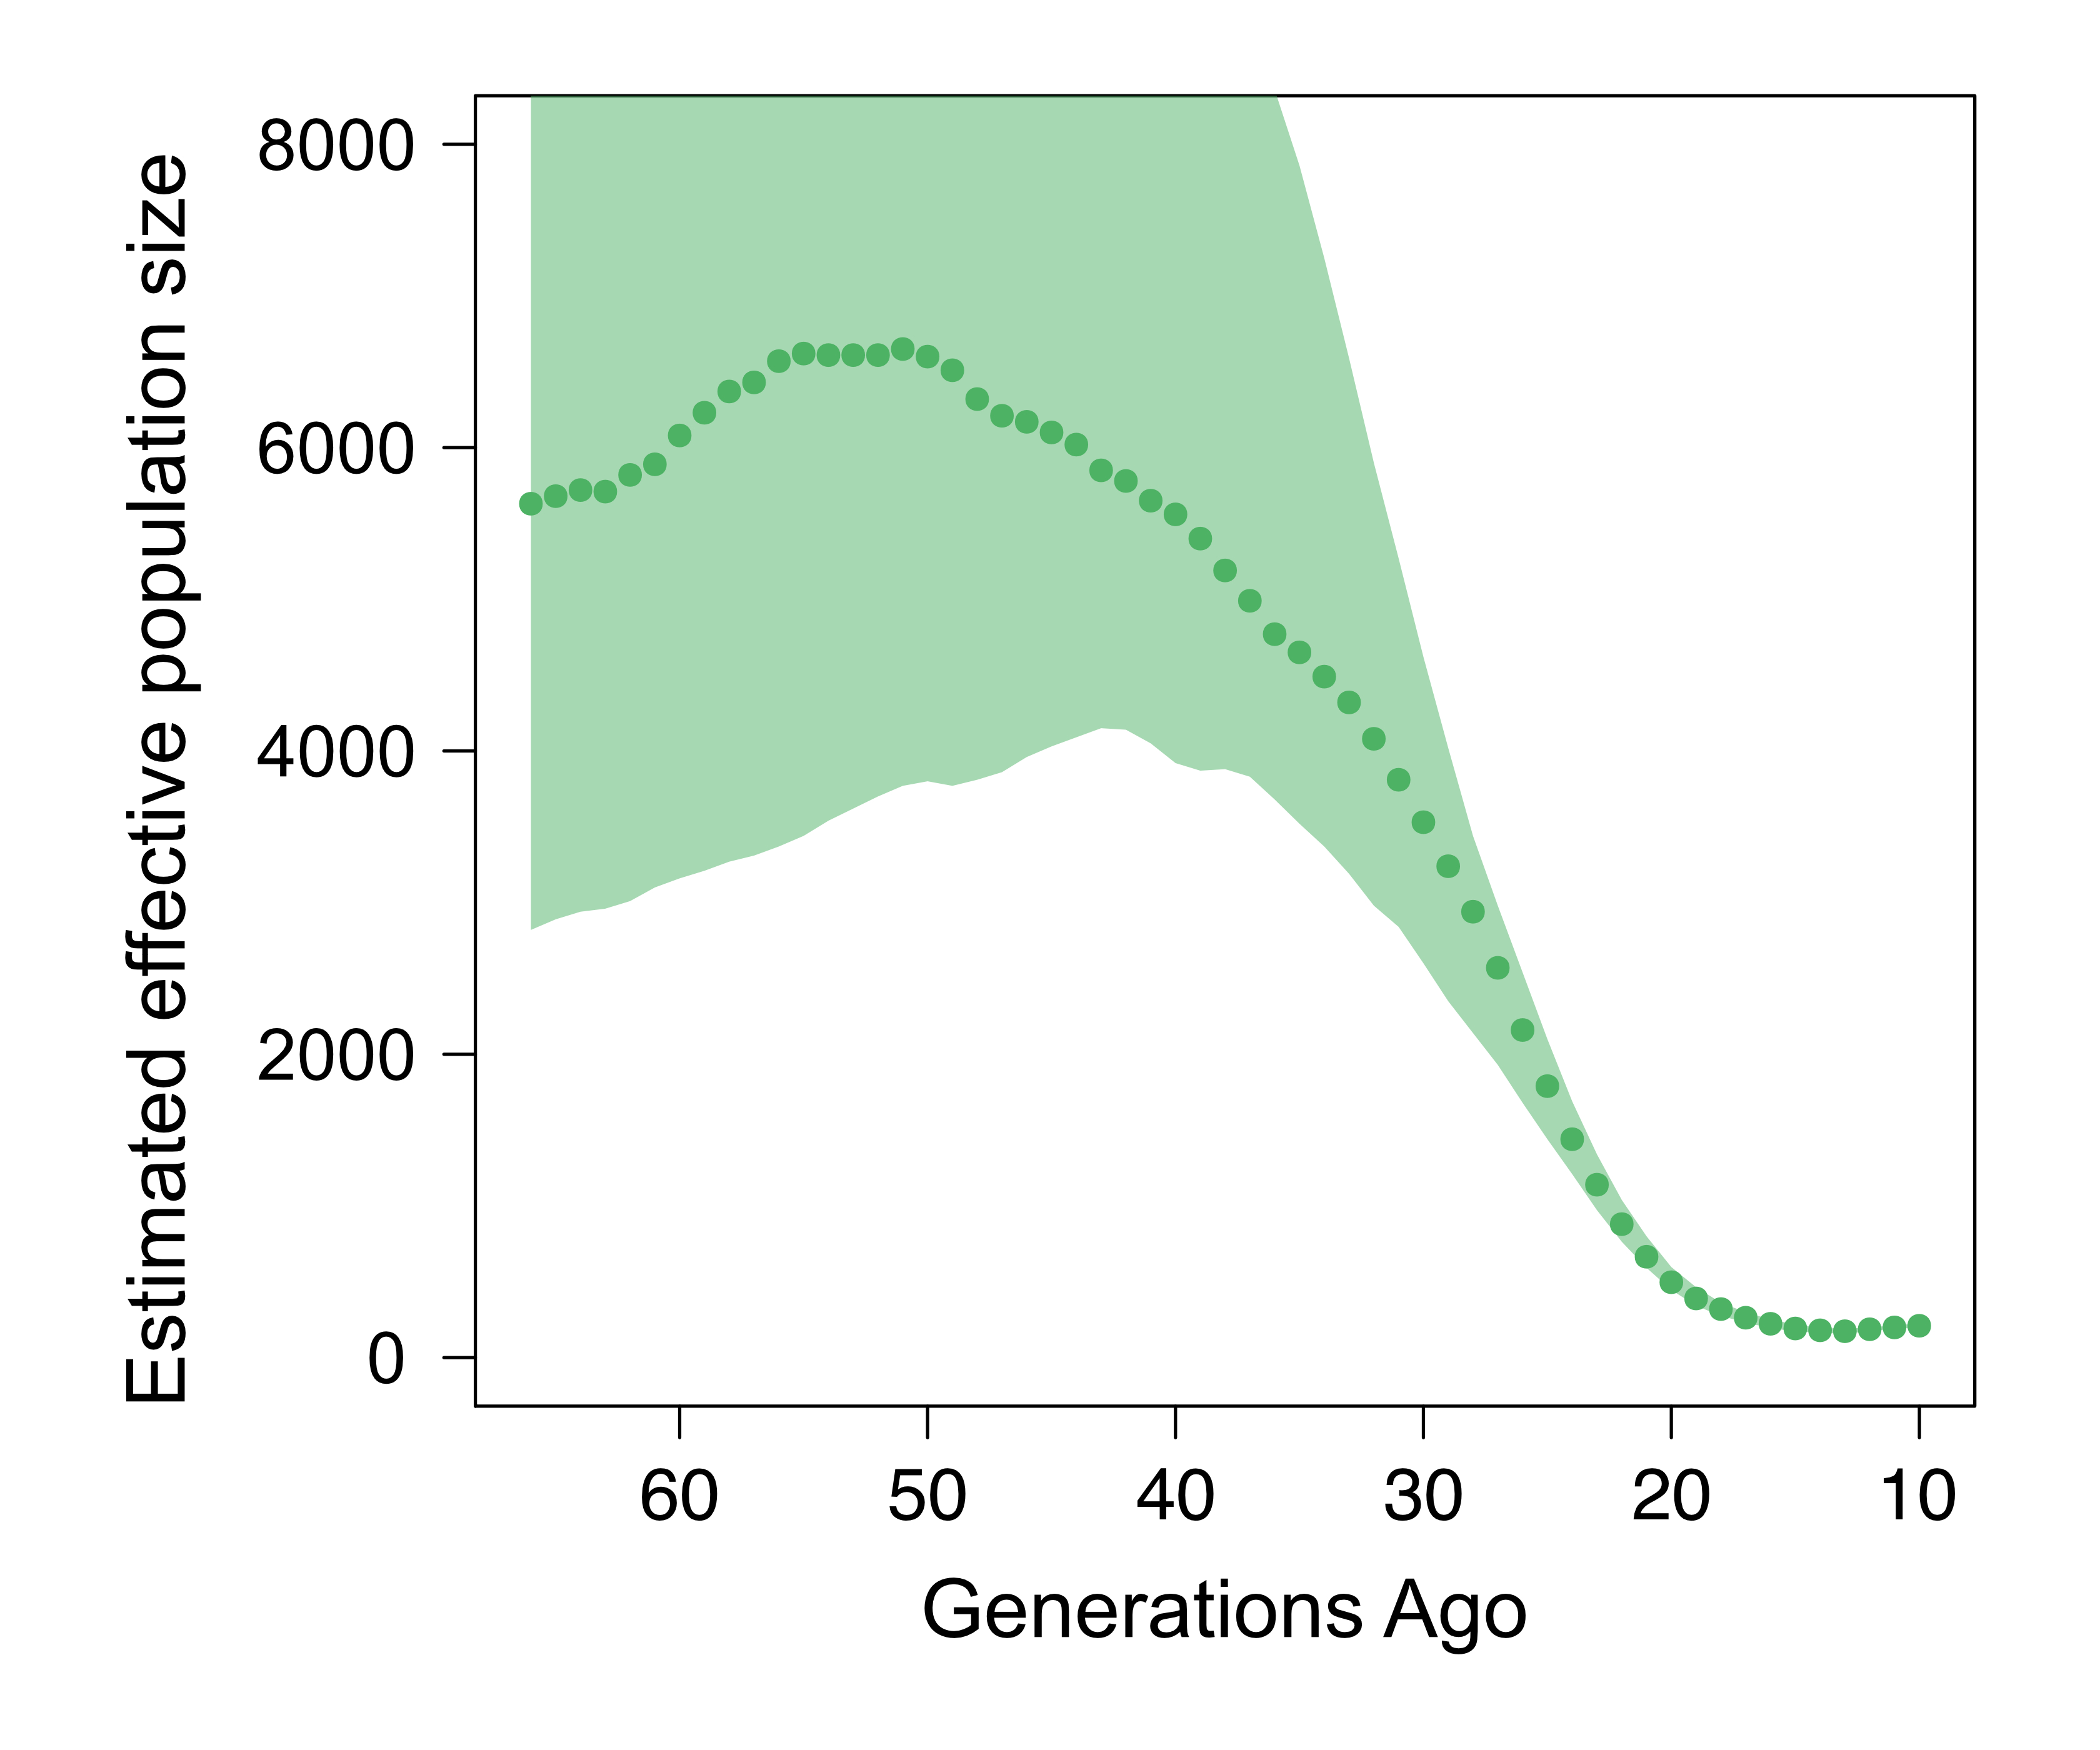 The estimated effective population size declines over 60 generations